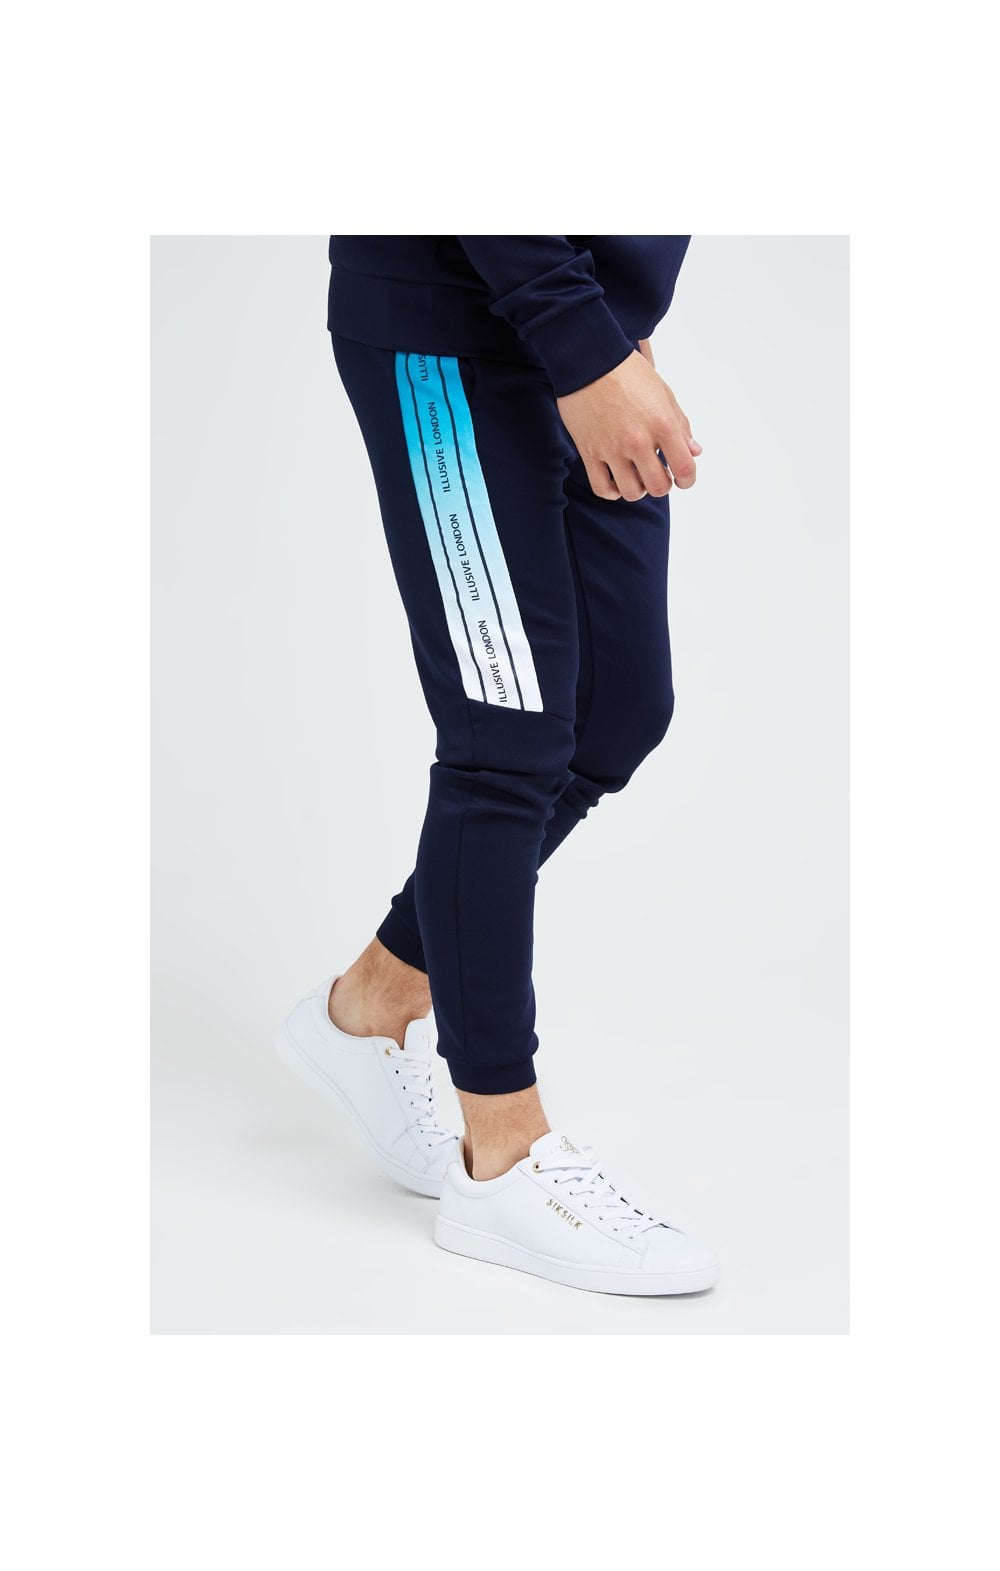 Illusive London Flux Taped Joggers - Navy &amp; Blue (1)